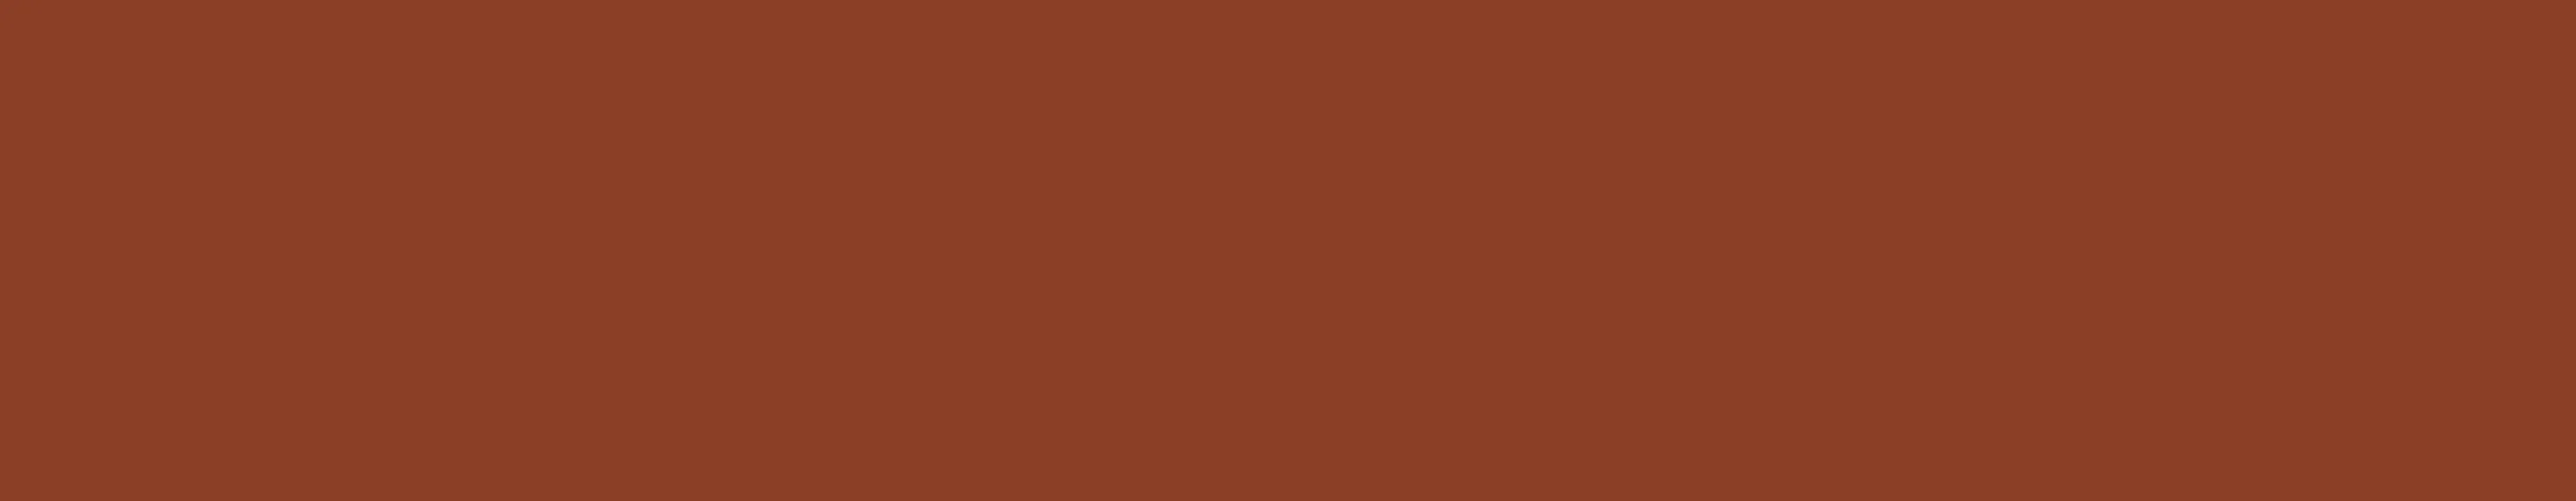 A brown background